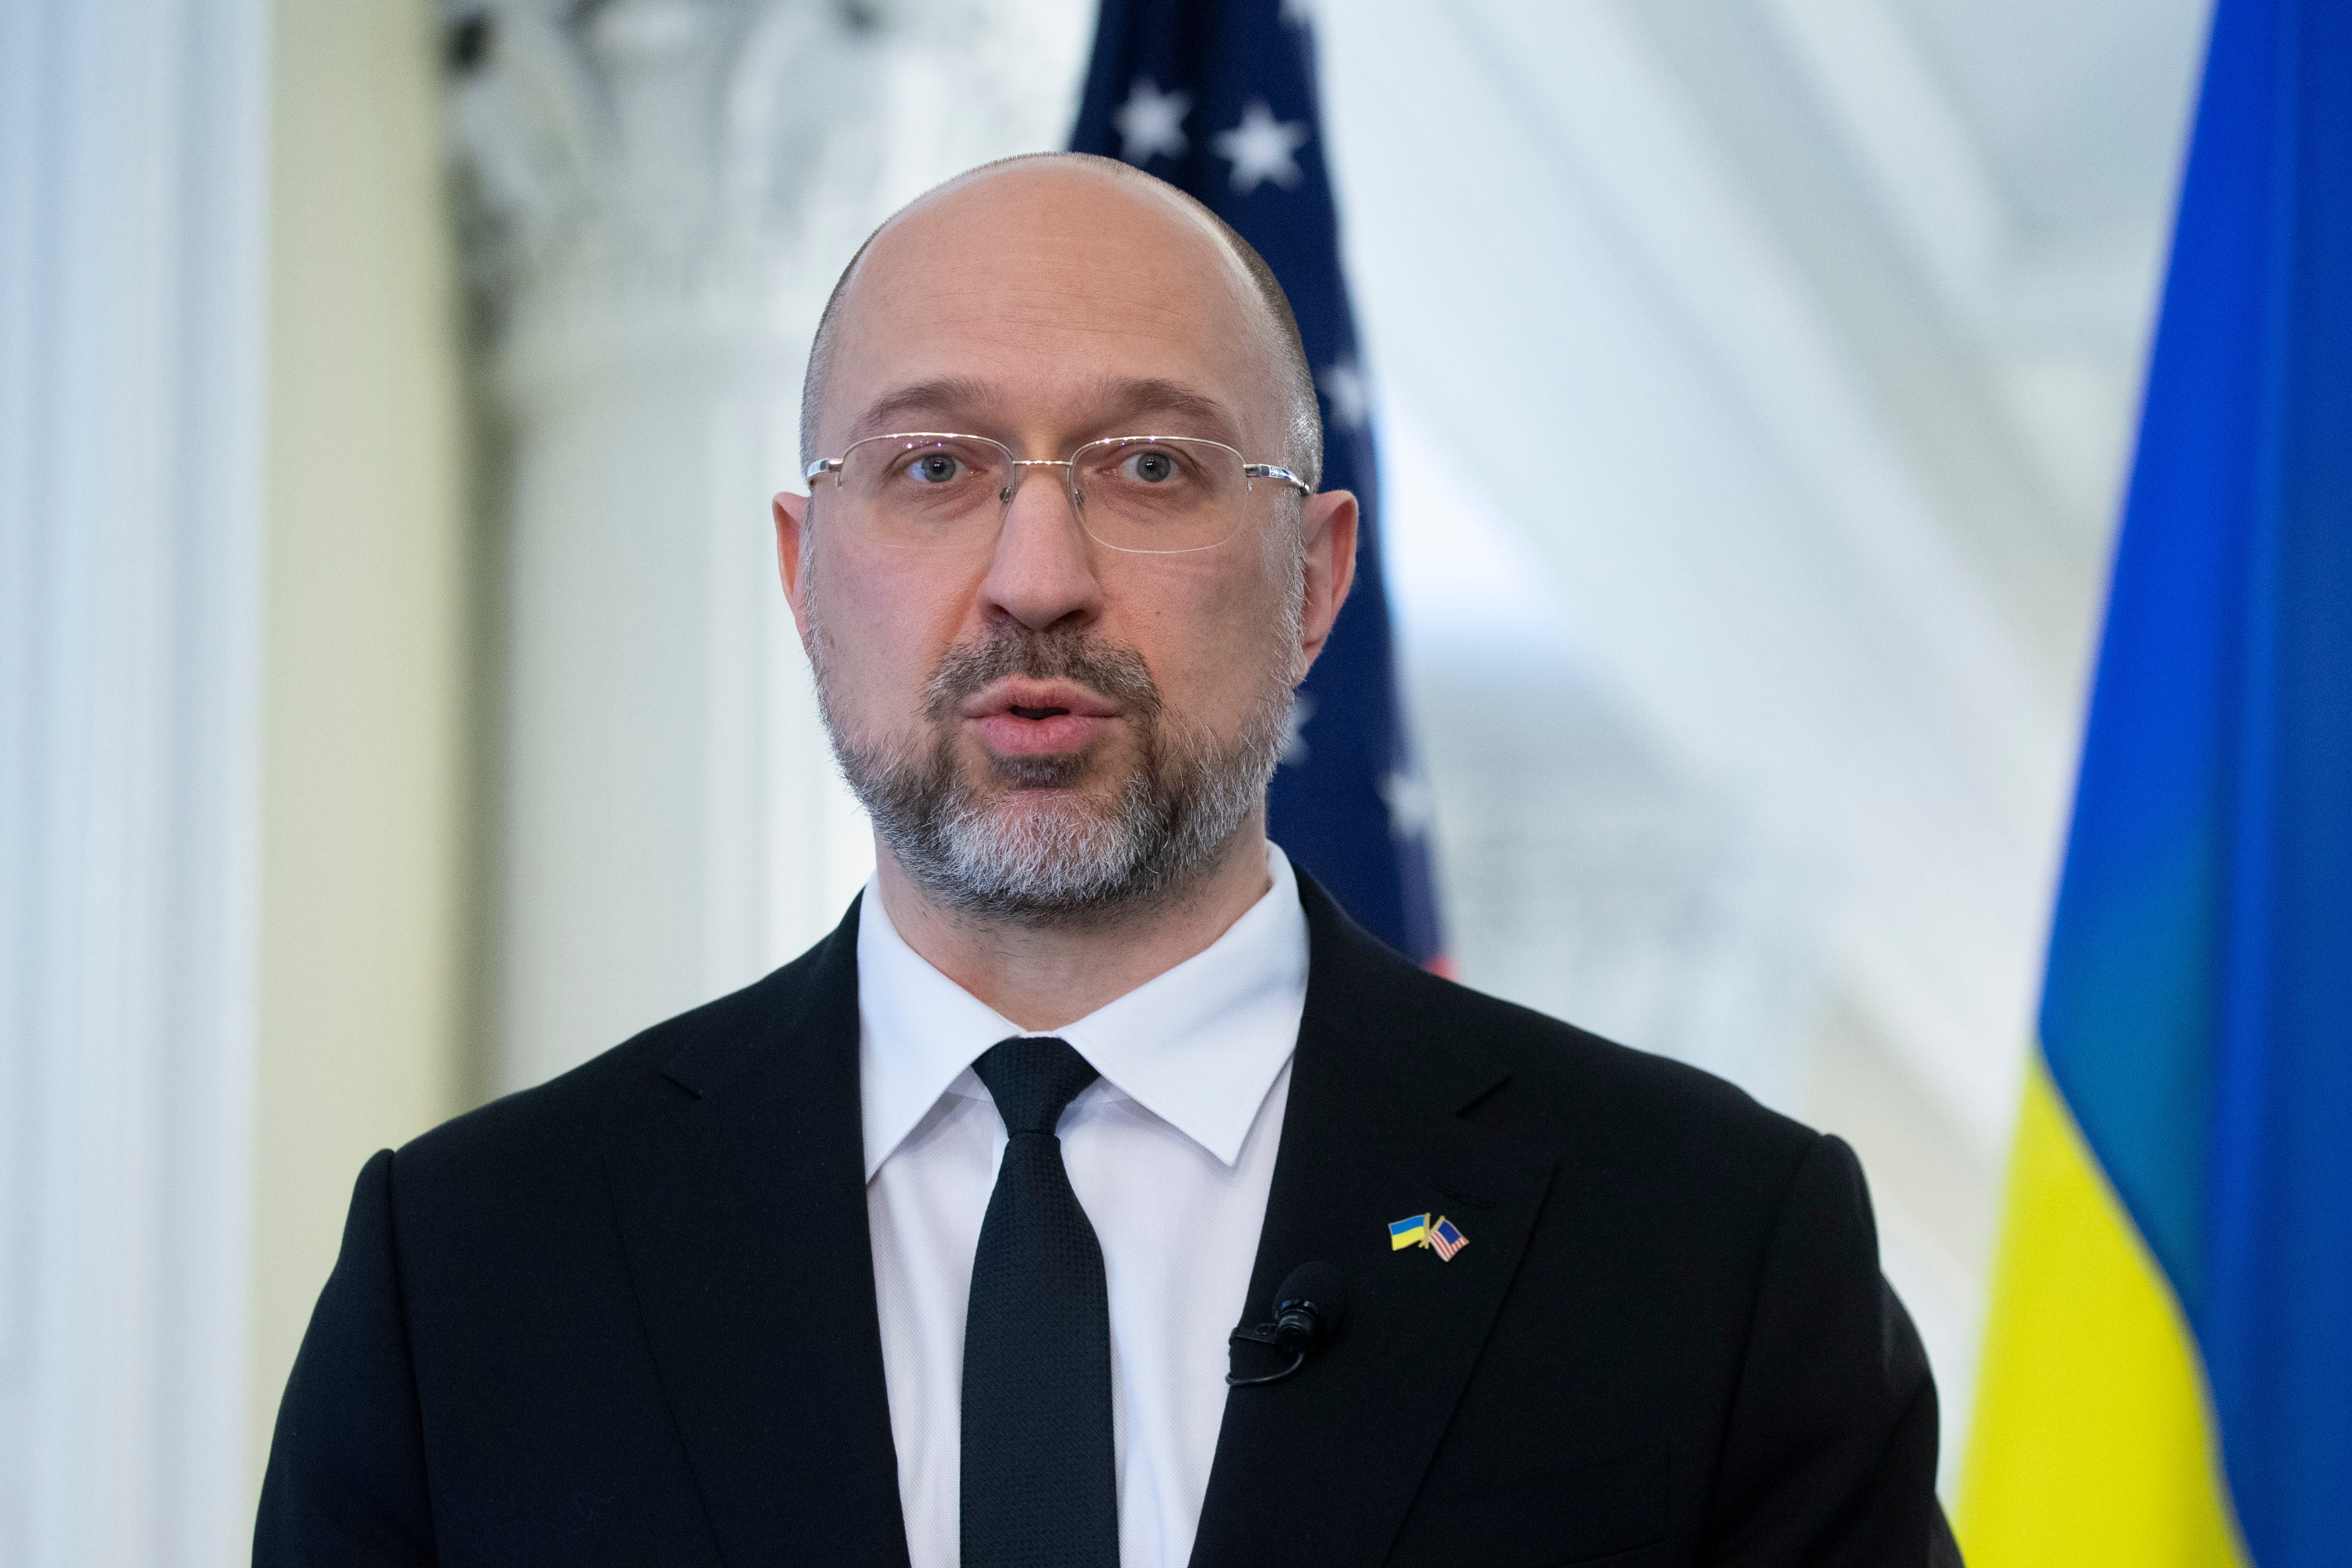 Ukraine’s prime minister has warned there will be a “third world war” if the country loses the war against Russia